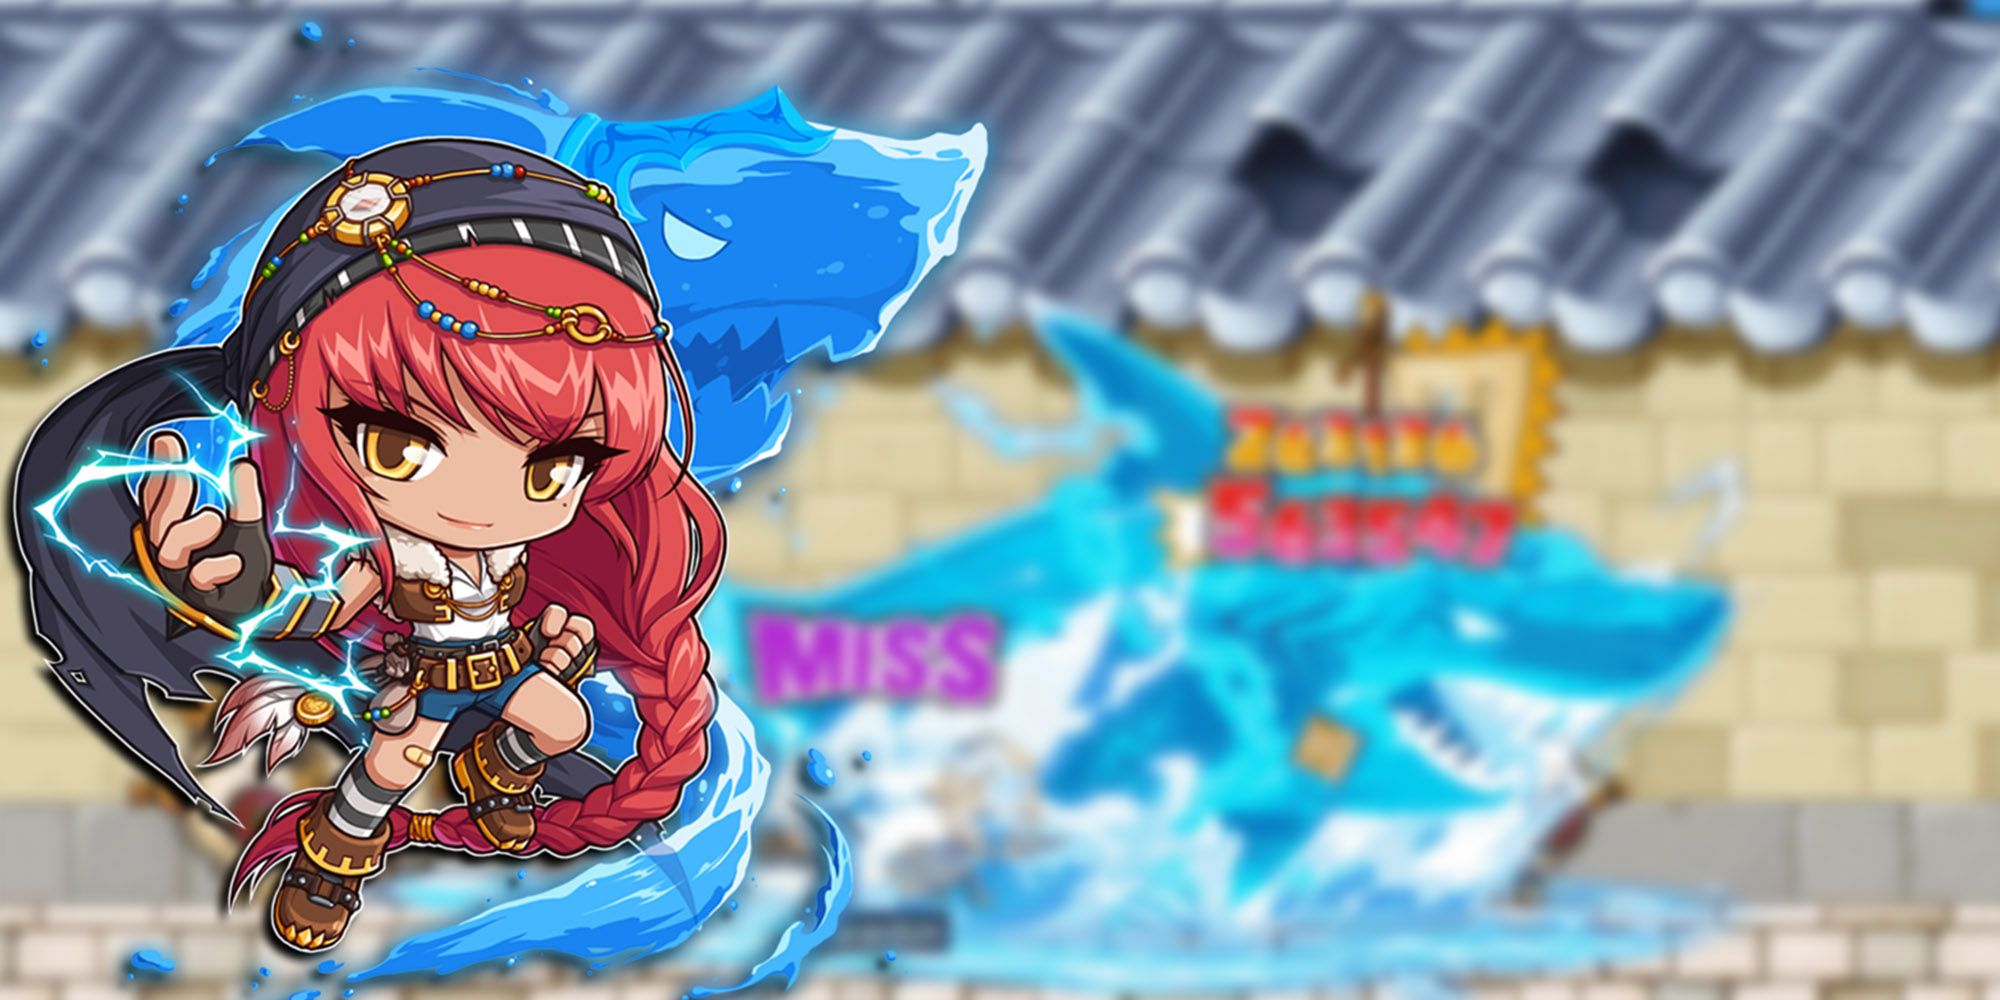 Maplestory - Thunder Breaker Using Skill That Summons Shark Made Of Water With PNG Of Class On Top